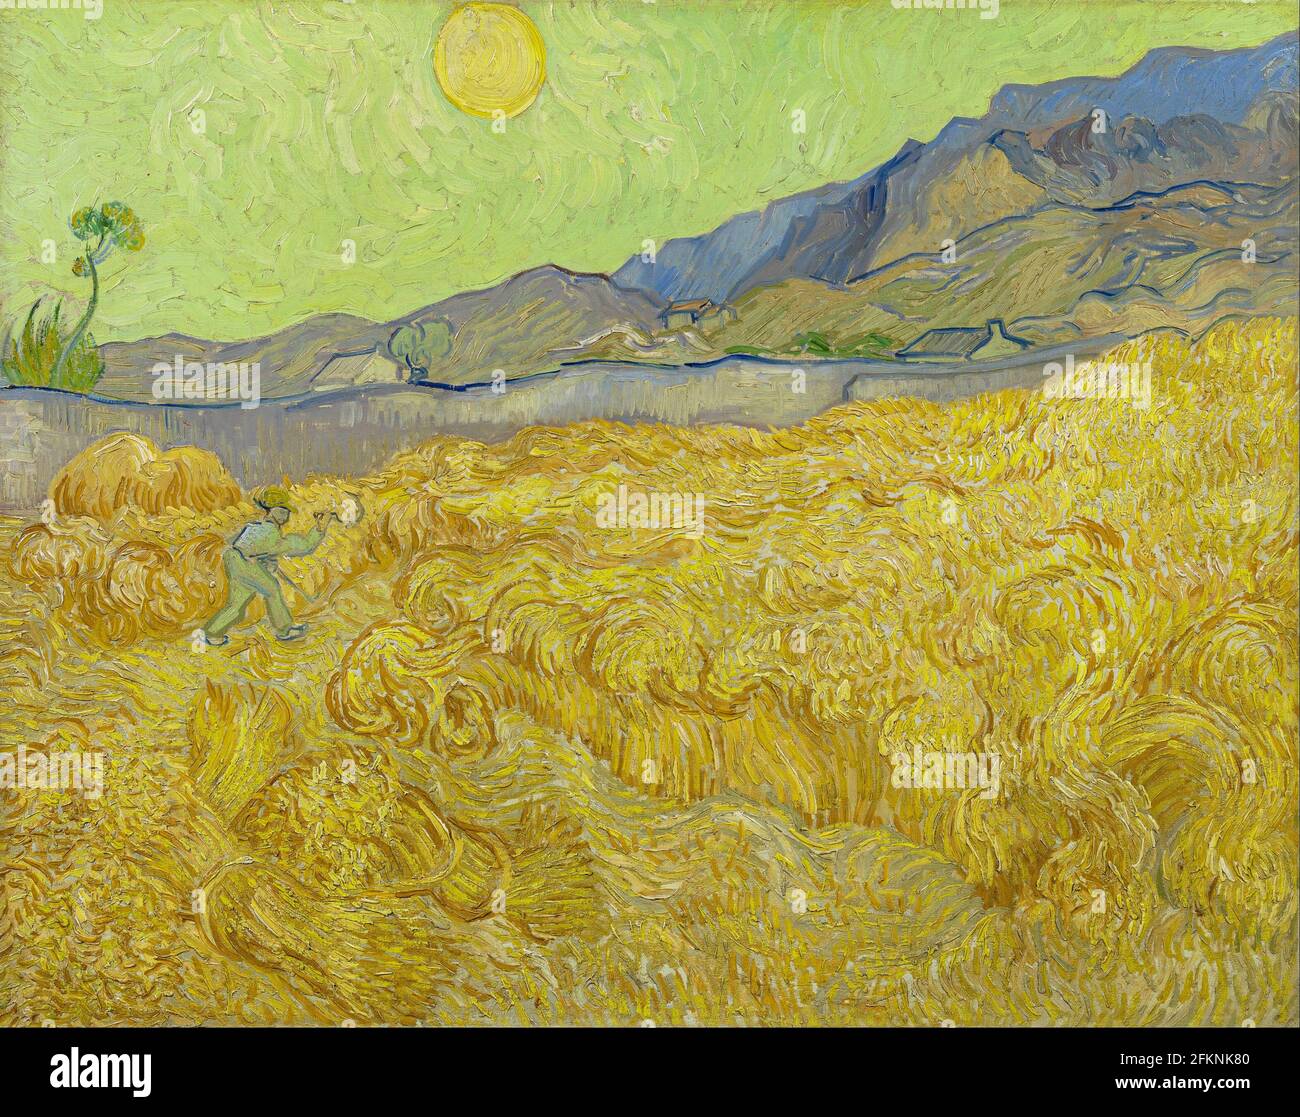 Vincent van Gogh, Wheatfield with a reaper, 1889, oil on canvas, Van Gogh Musem, Amsterdam, Netherlands Stock Photo